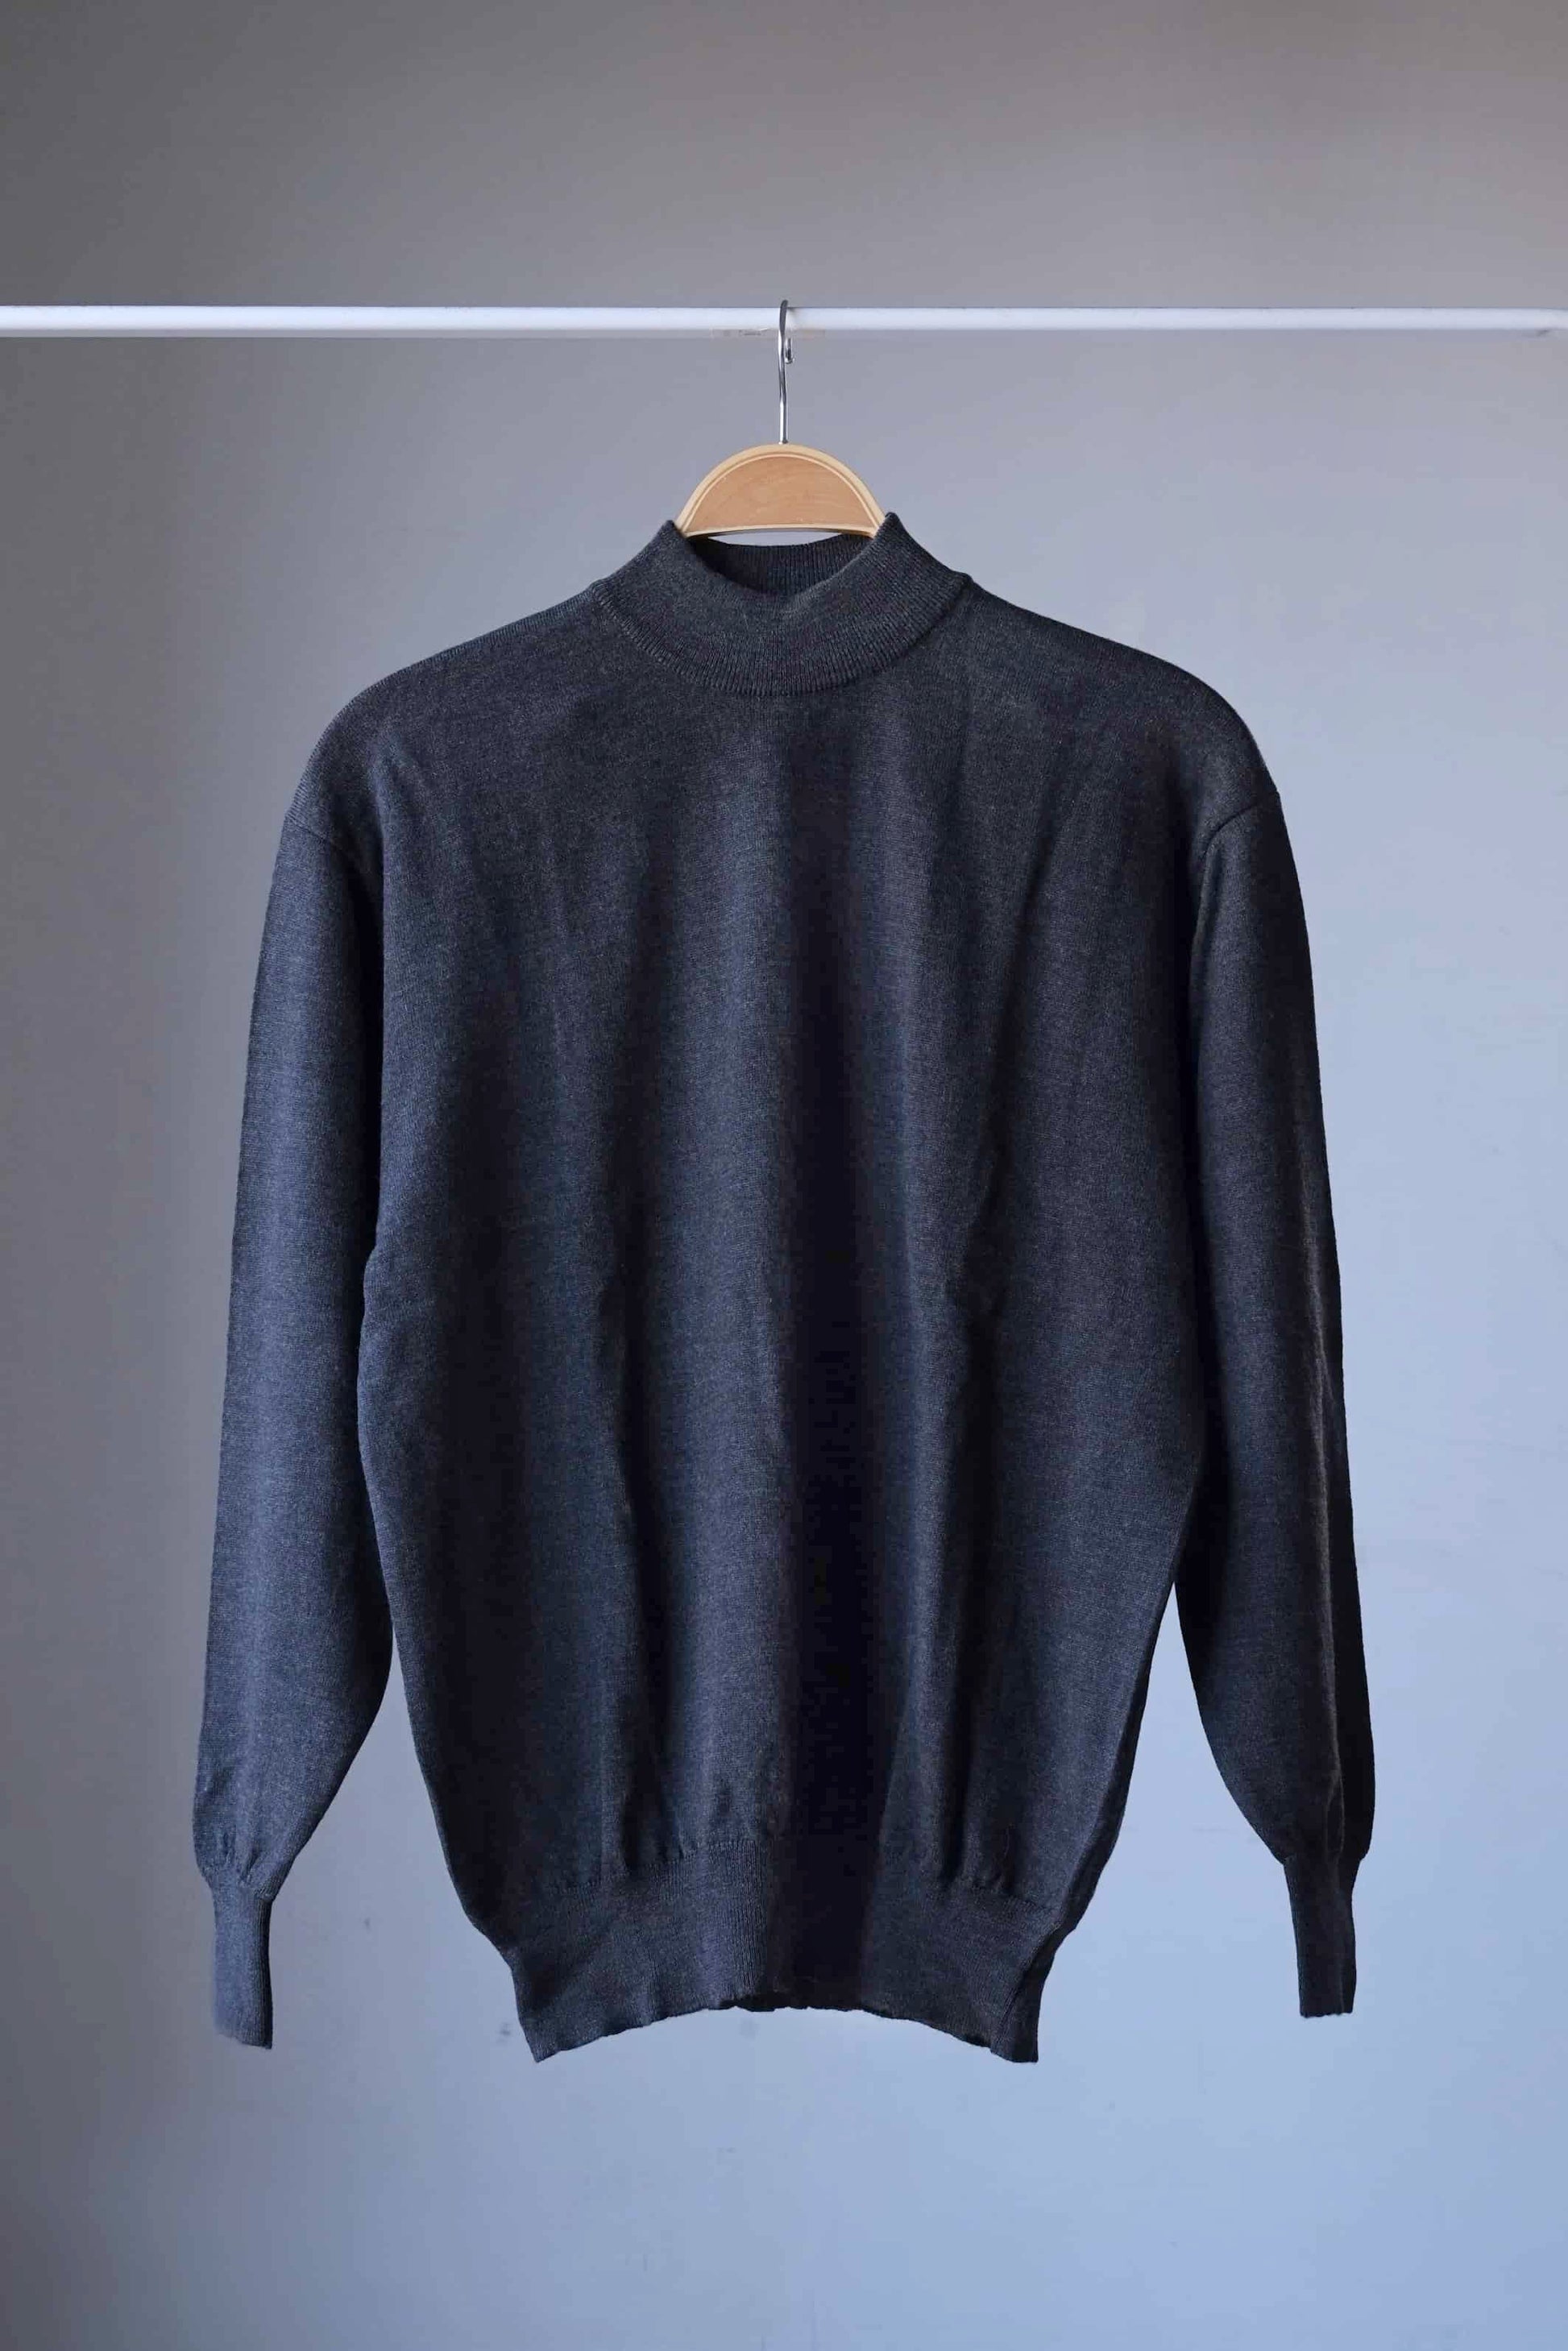 90's Solid High Neck Sweater charcoal grey